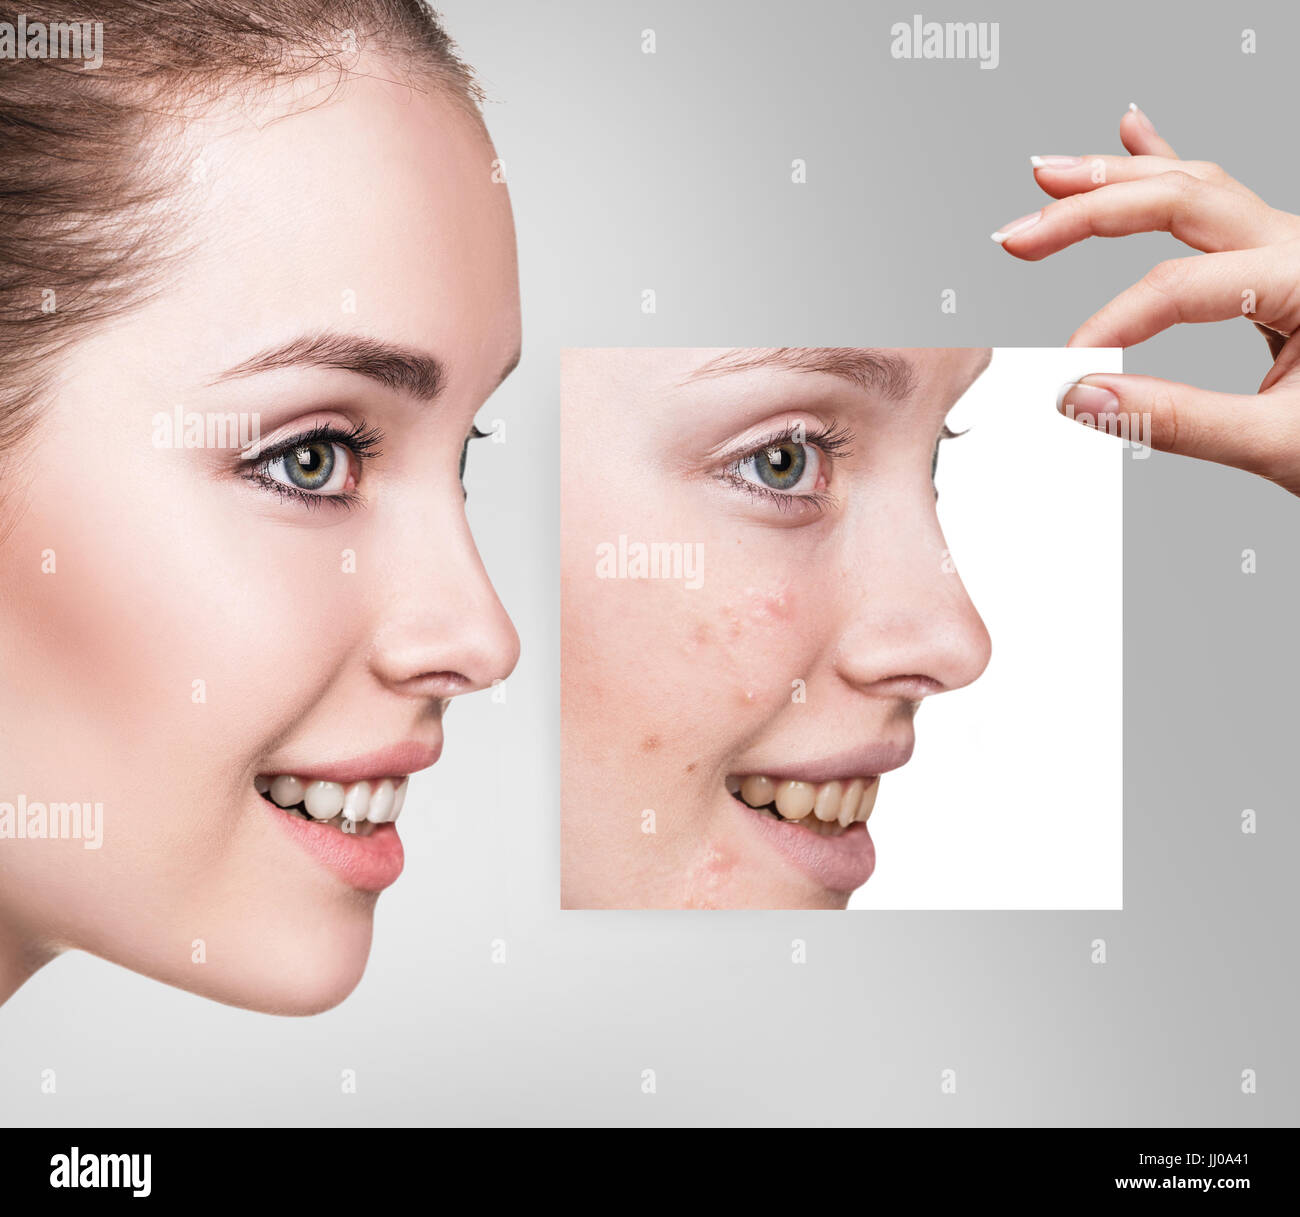 Woman shows photo with bad skin before treatment. Stock Photo